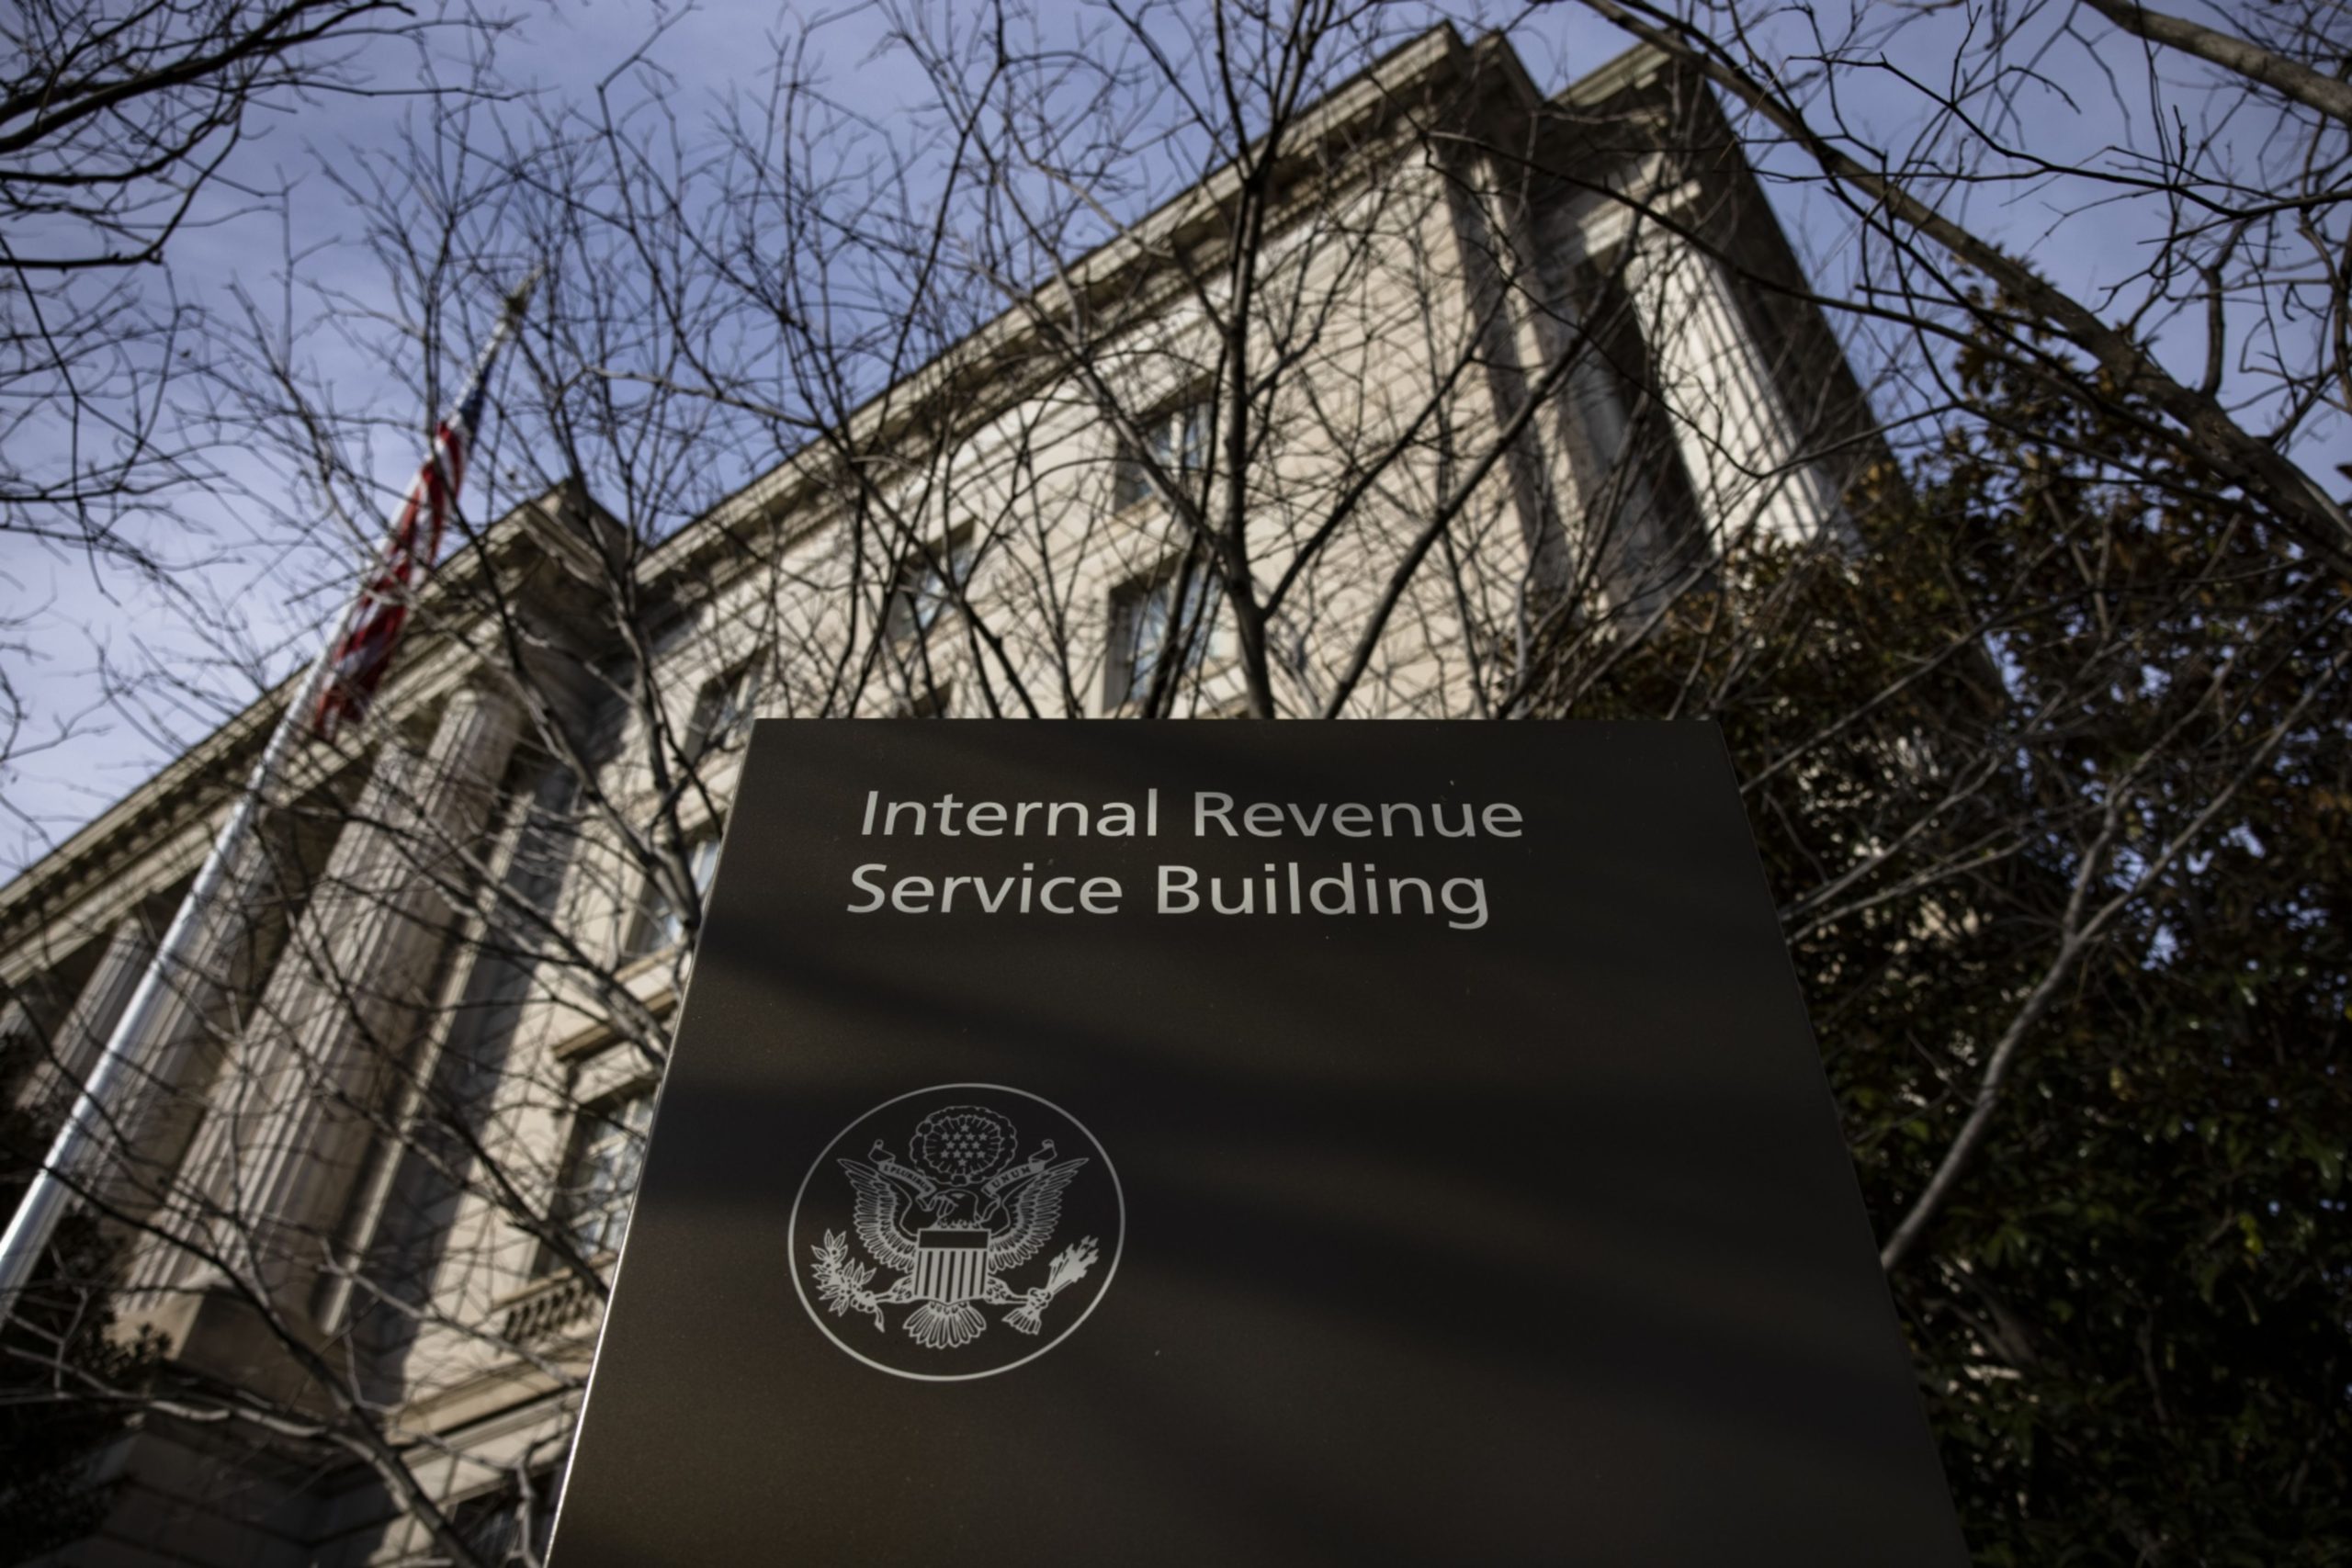 IRS to allow efiling of new K2 and K3 schedules starting in March